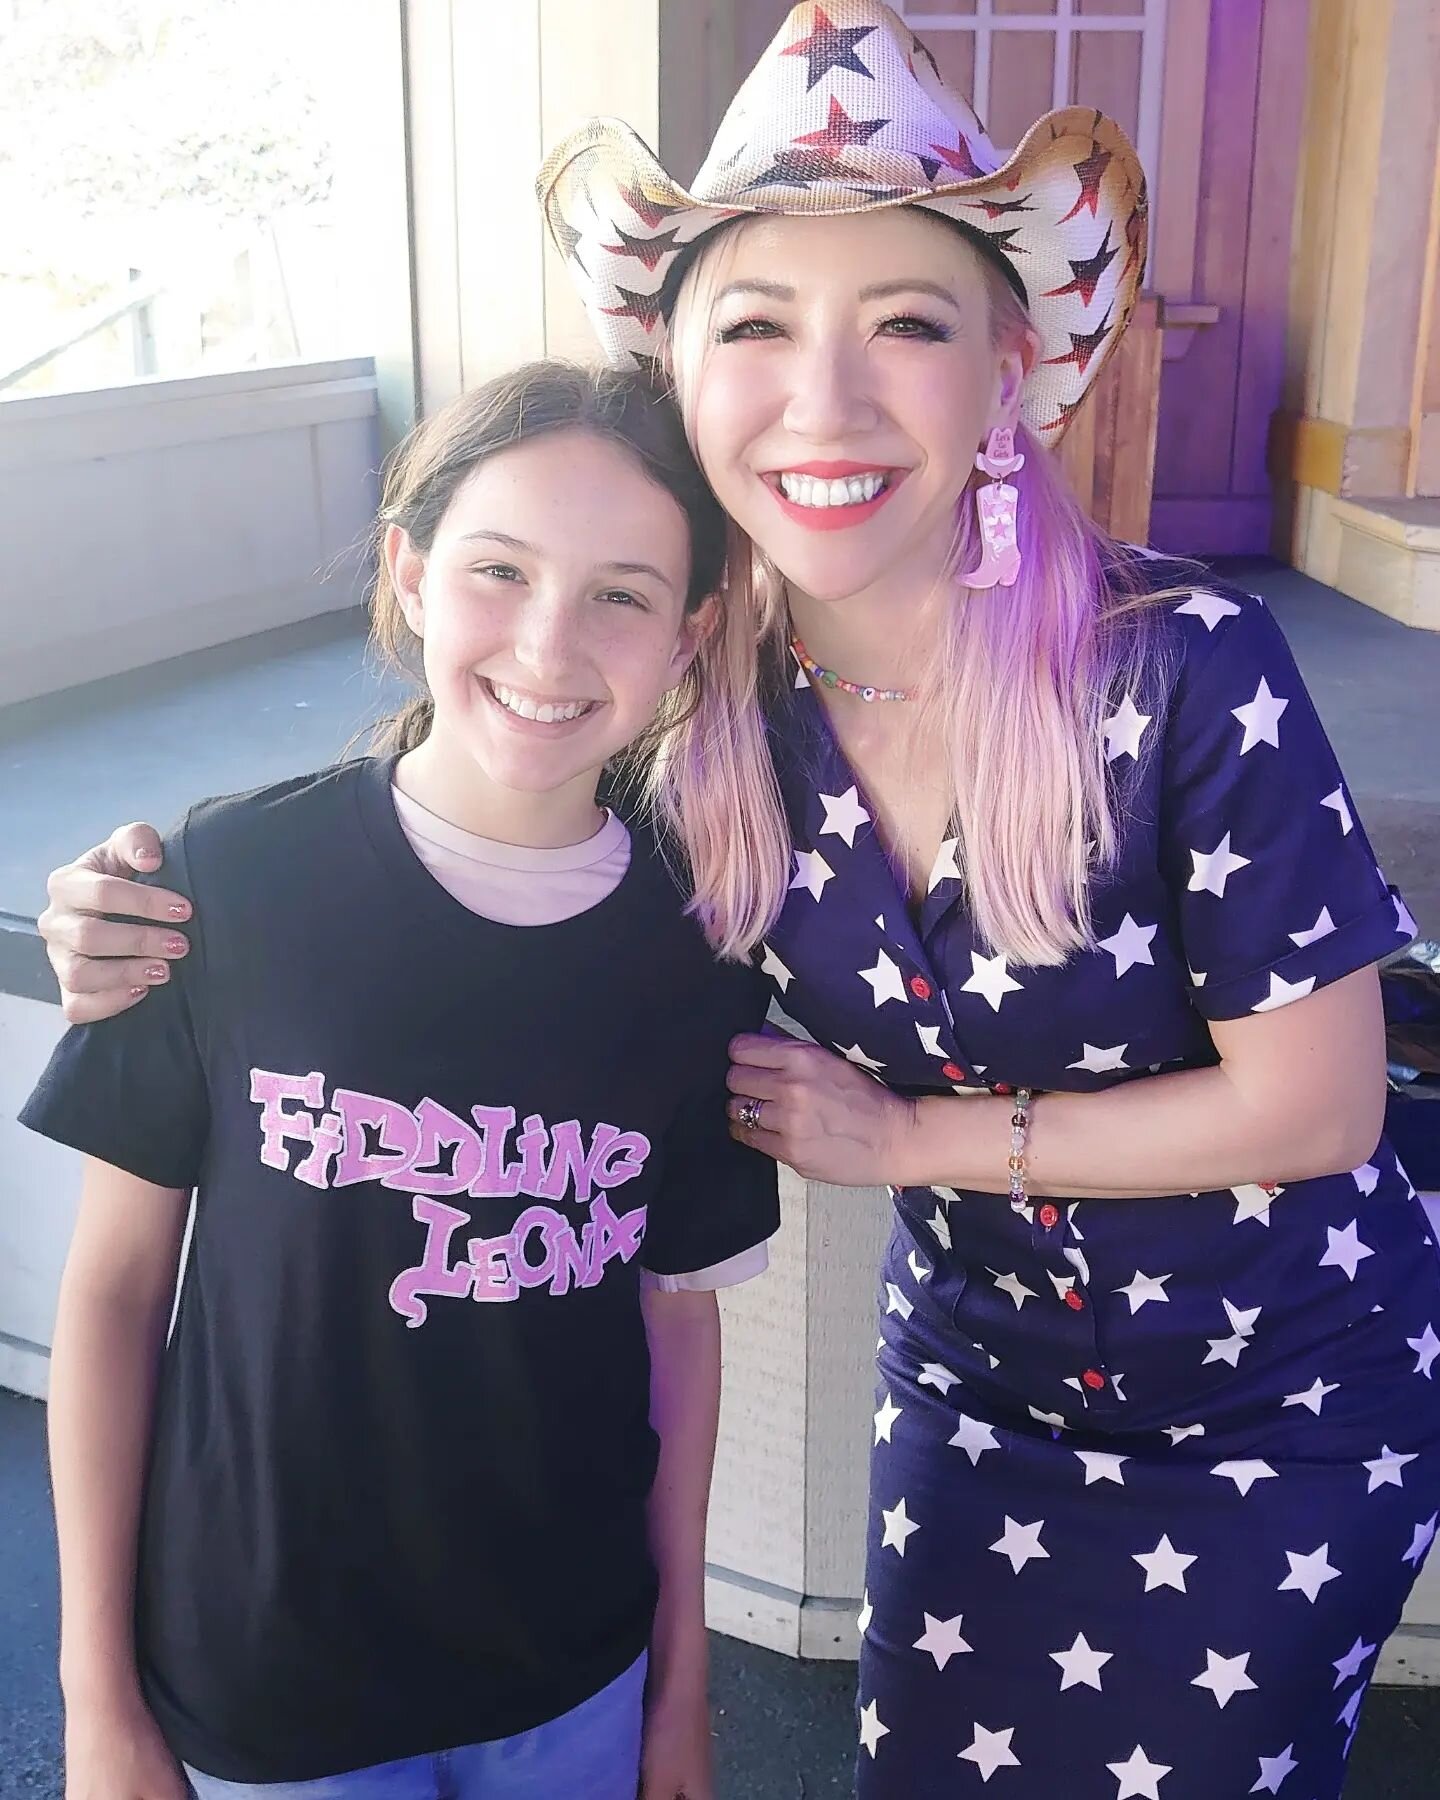 ⭐aaand that's a wrap!!⭐

This girl was totally mesmerized by my story. She pulled up my website, my Amazon music page, and Swap Shop on Netflix, all on her phone!! Isn't she adorable in my Fiddling Leona shirt!?😍🤩&hearts;️ 

Once again I would like